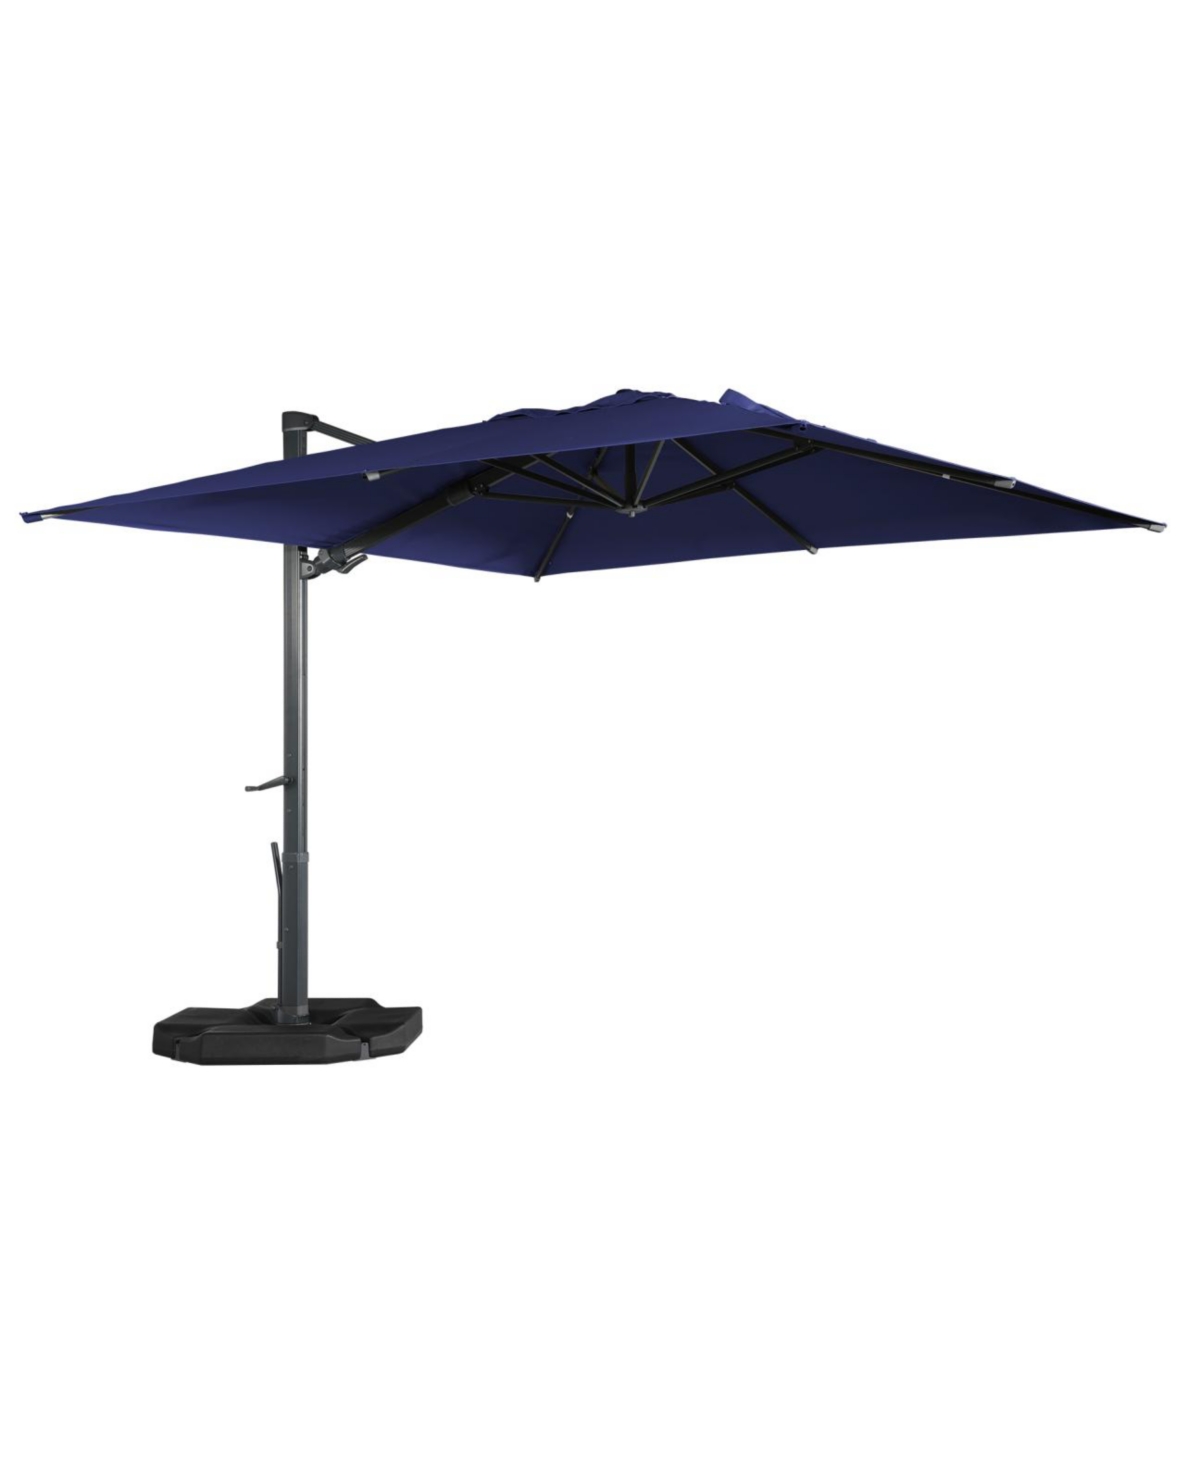 10ft Square Offset Cantilever Patio Umbrella with Included 4-piece Base Weights - Gray